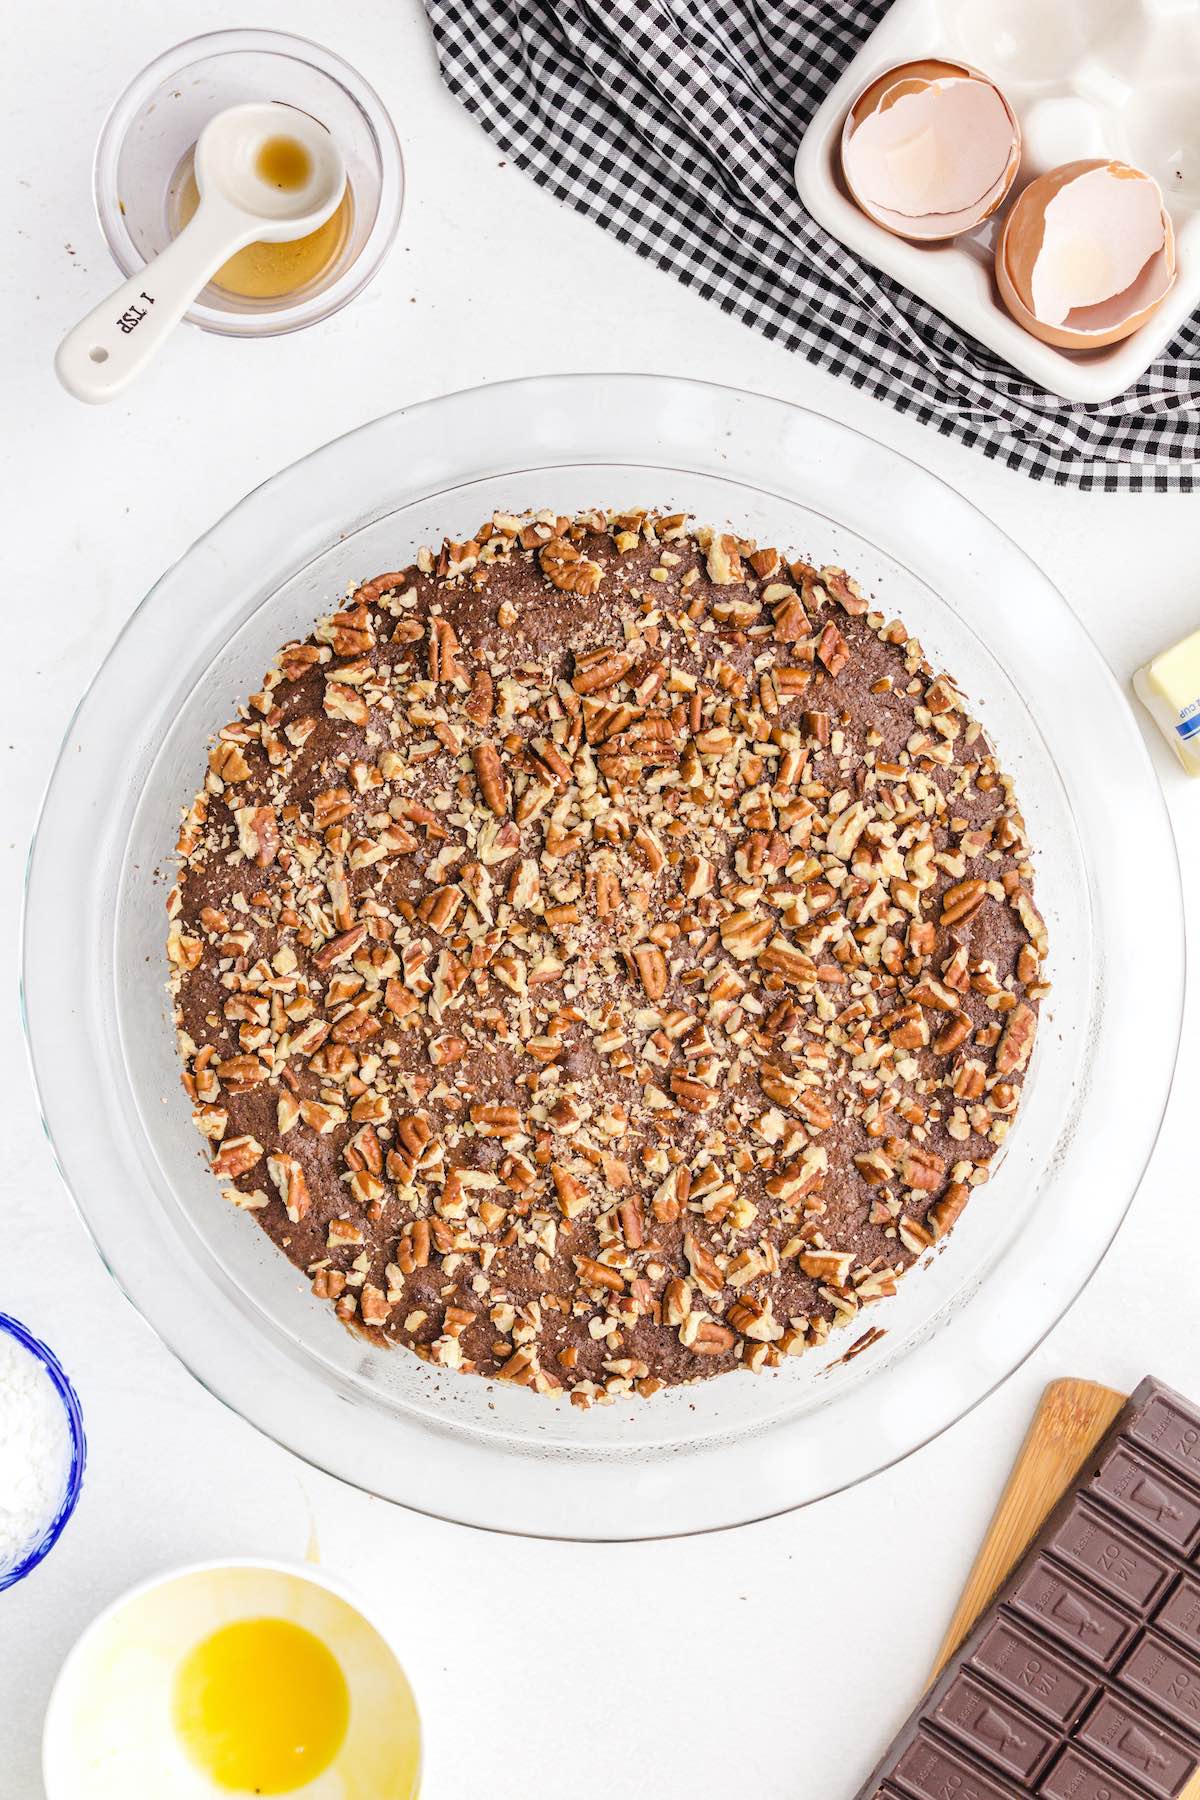 spread pecans on top of the brownie layer